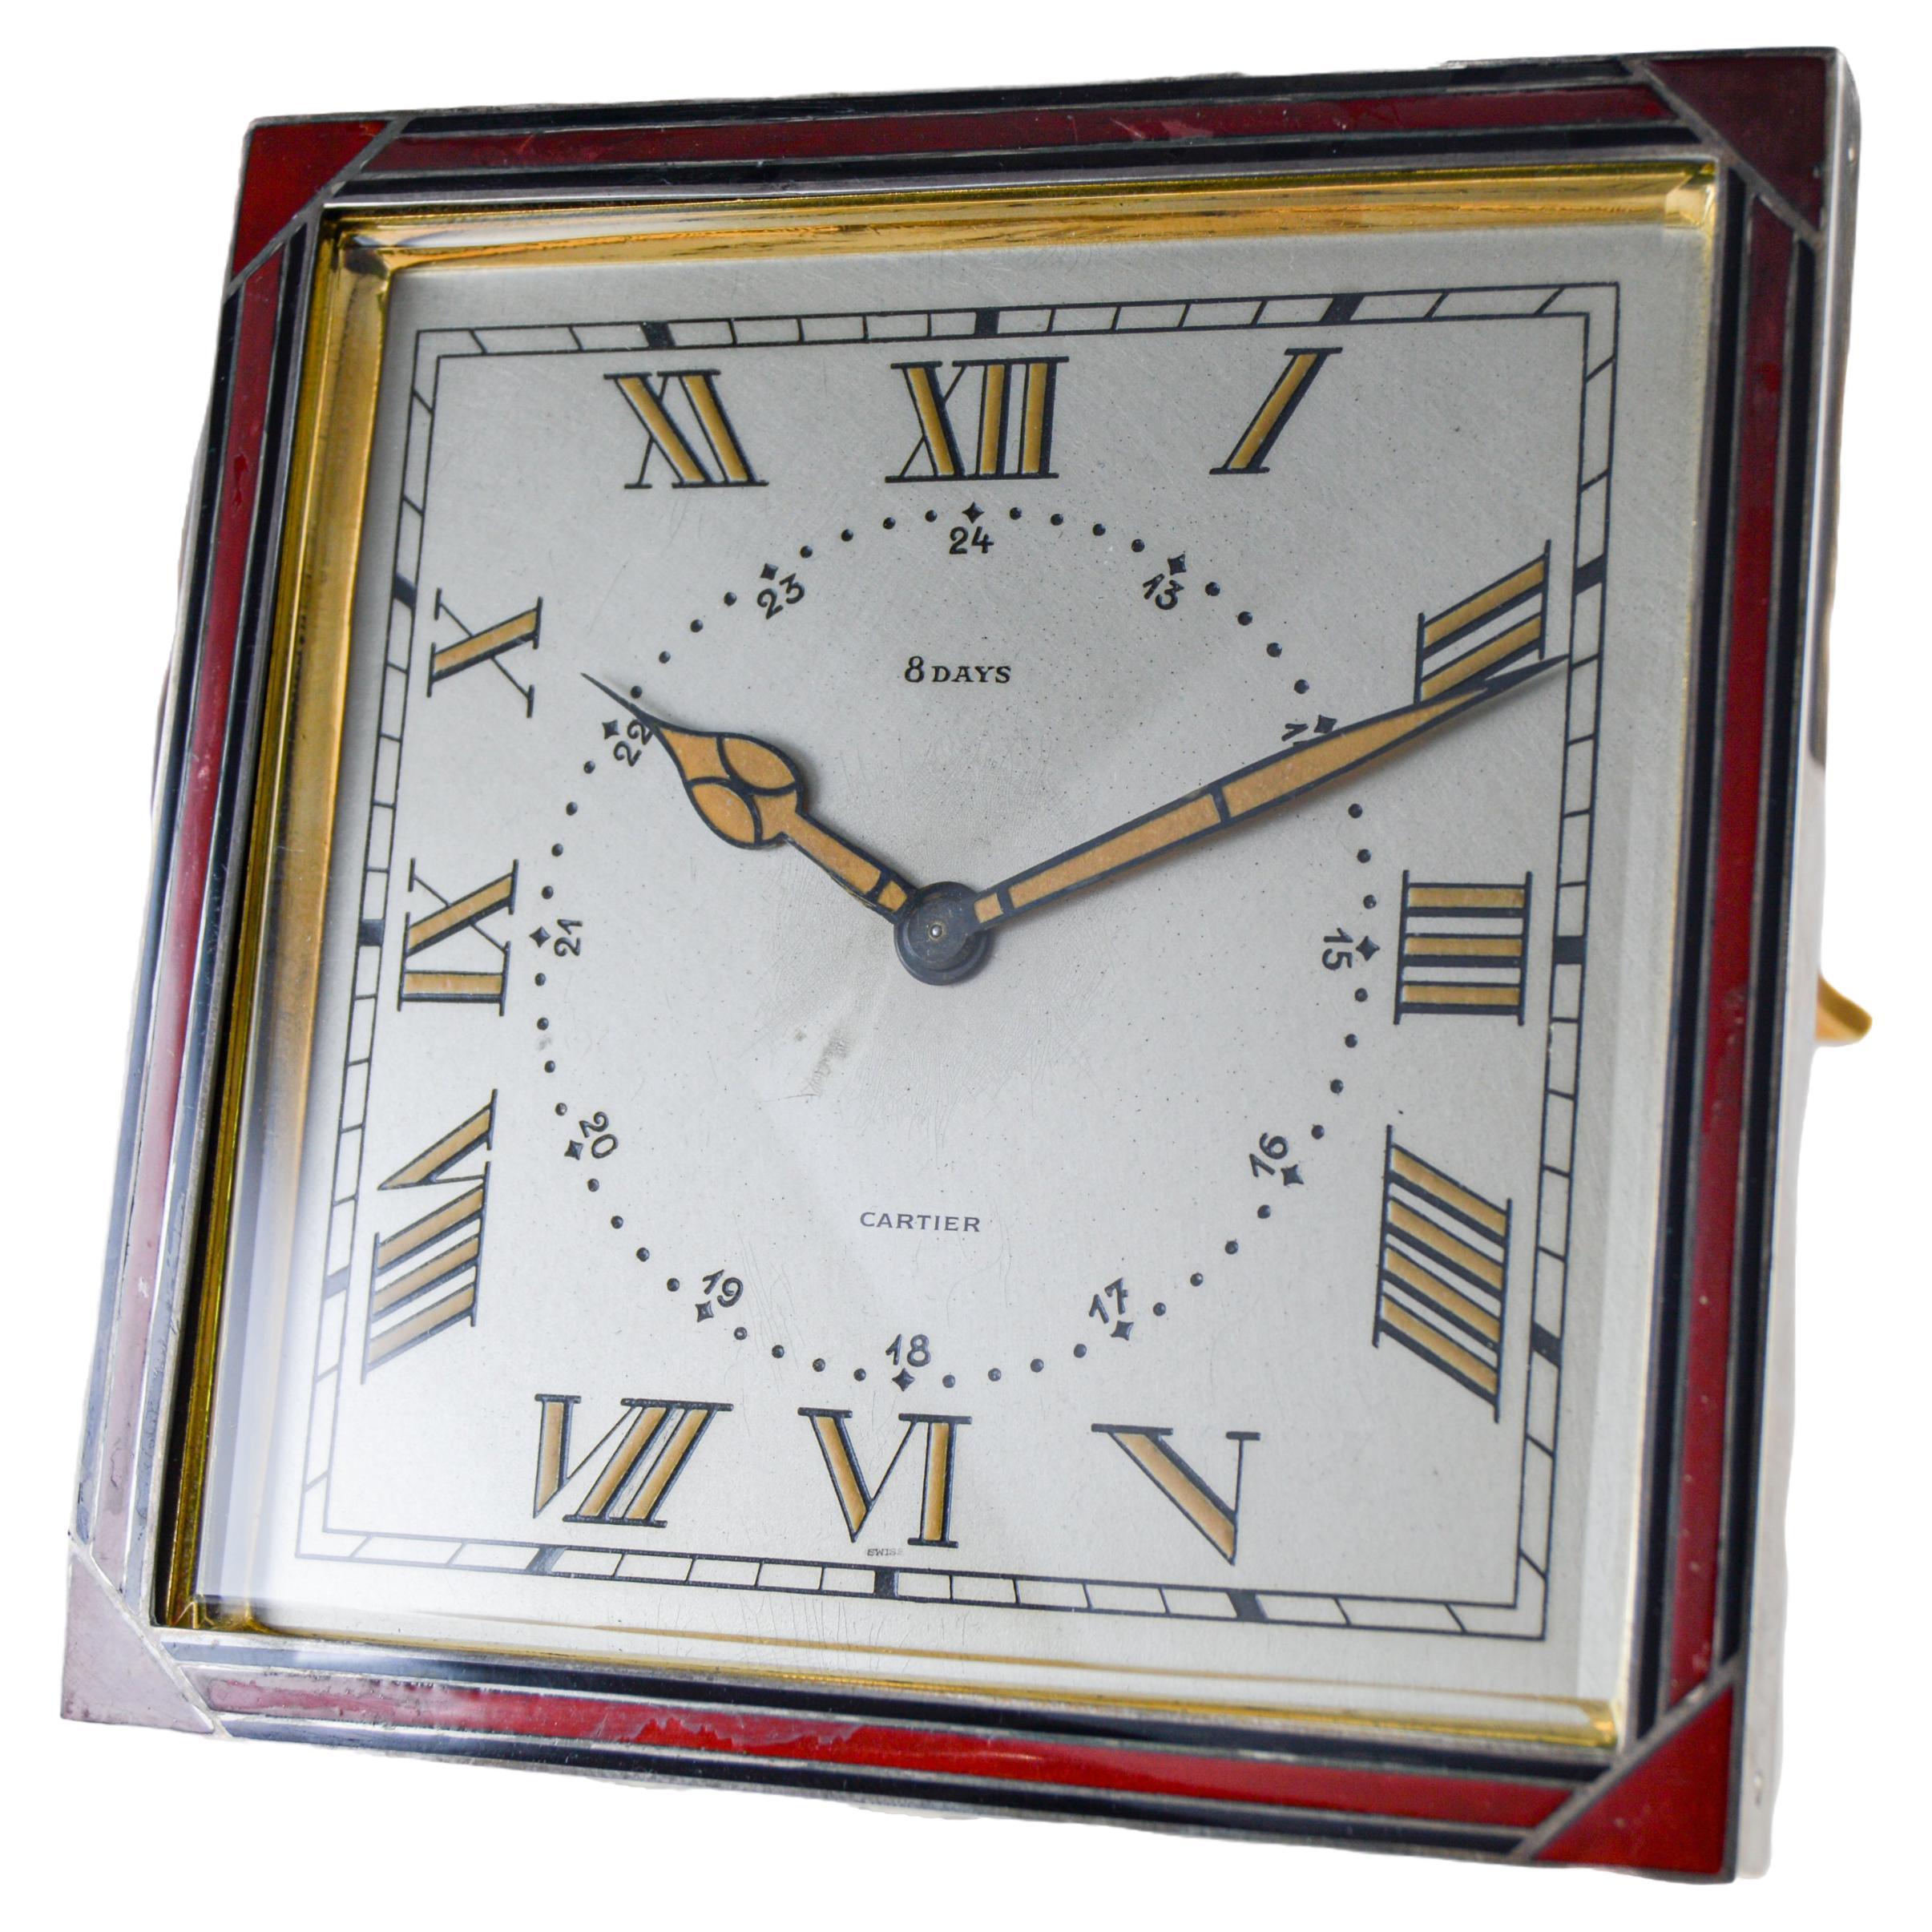 Cartier Sterling and Enamel Art Deco Desk Clock with Breguet Engine Turned Dial For Sale